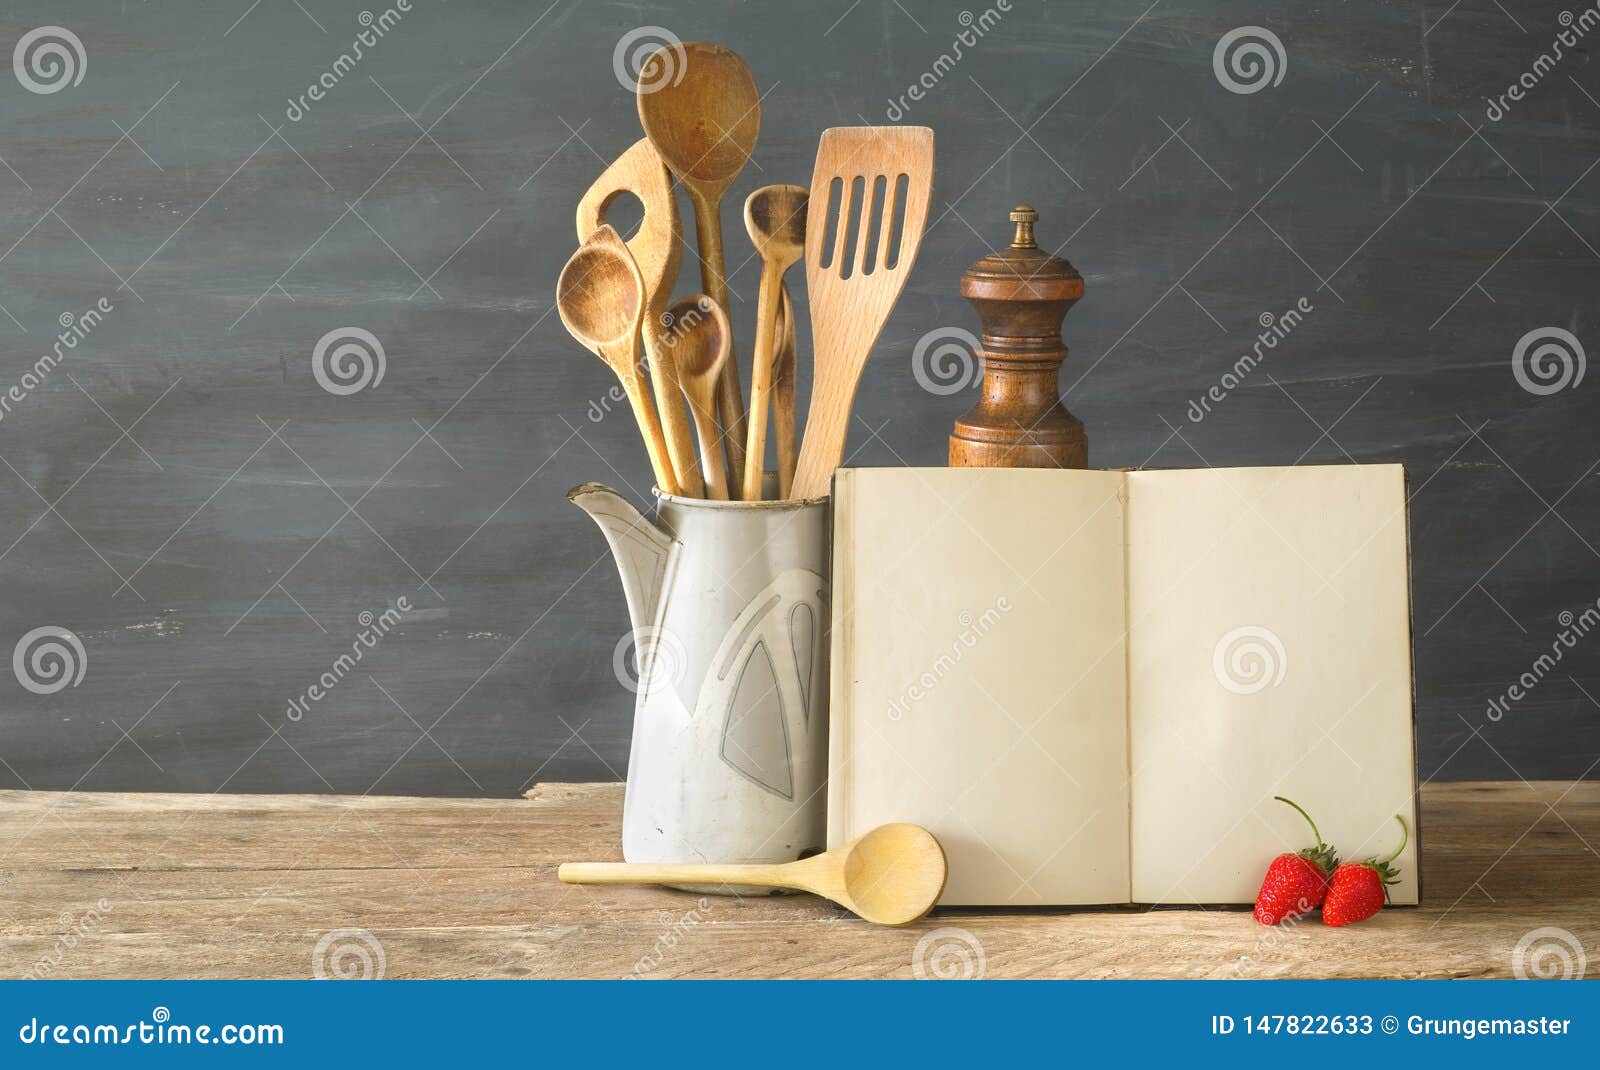 cookbook or recipe book with wooden spoons and strawberries, mockup w. free copy space